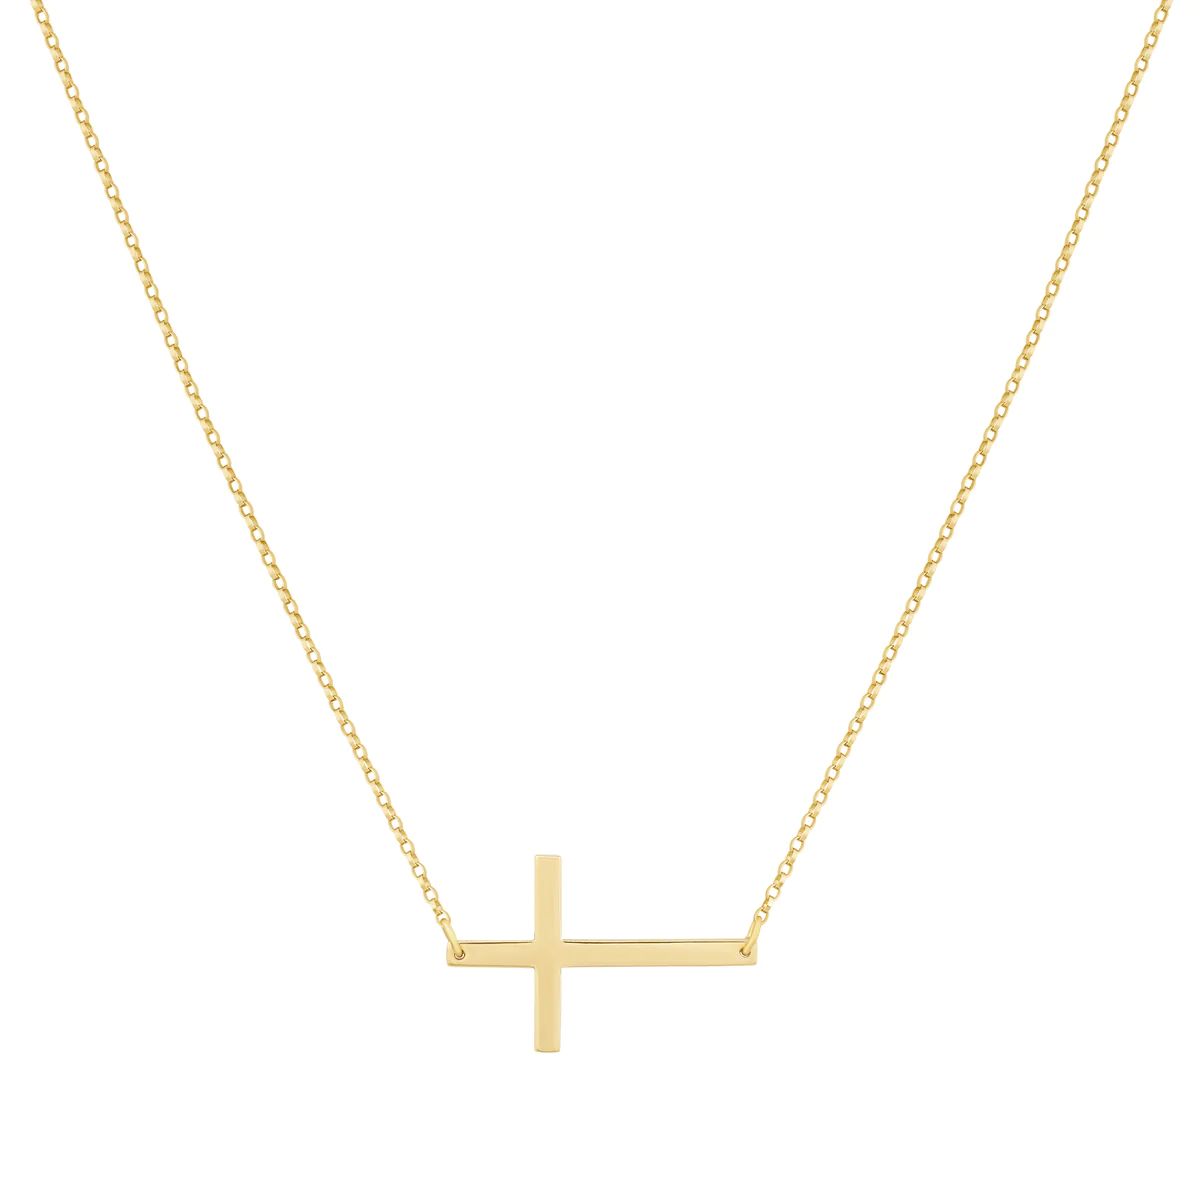 Creed Necklace | Electric Picks Jewelry